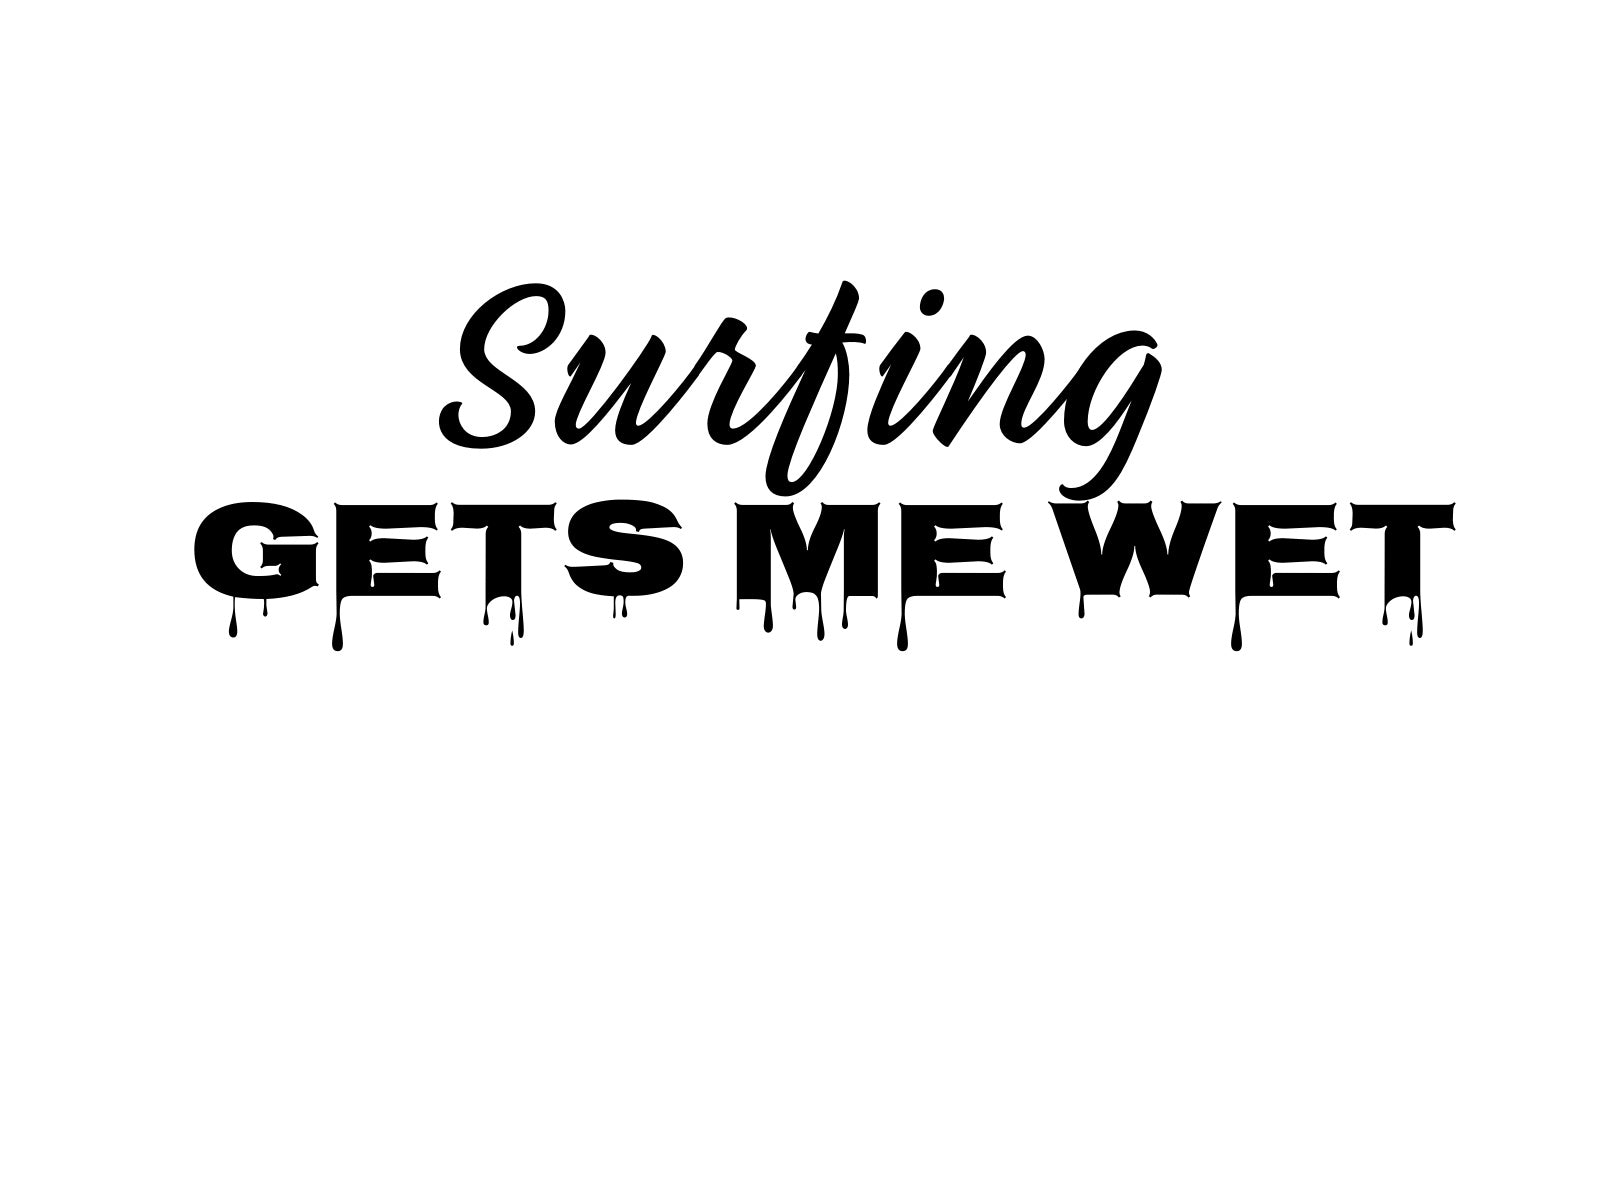 Surfing Gets Me Wet